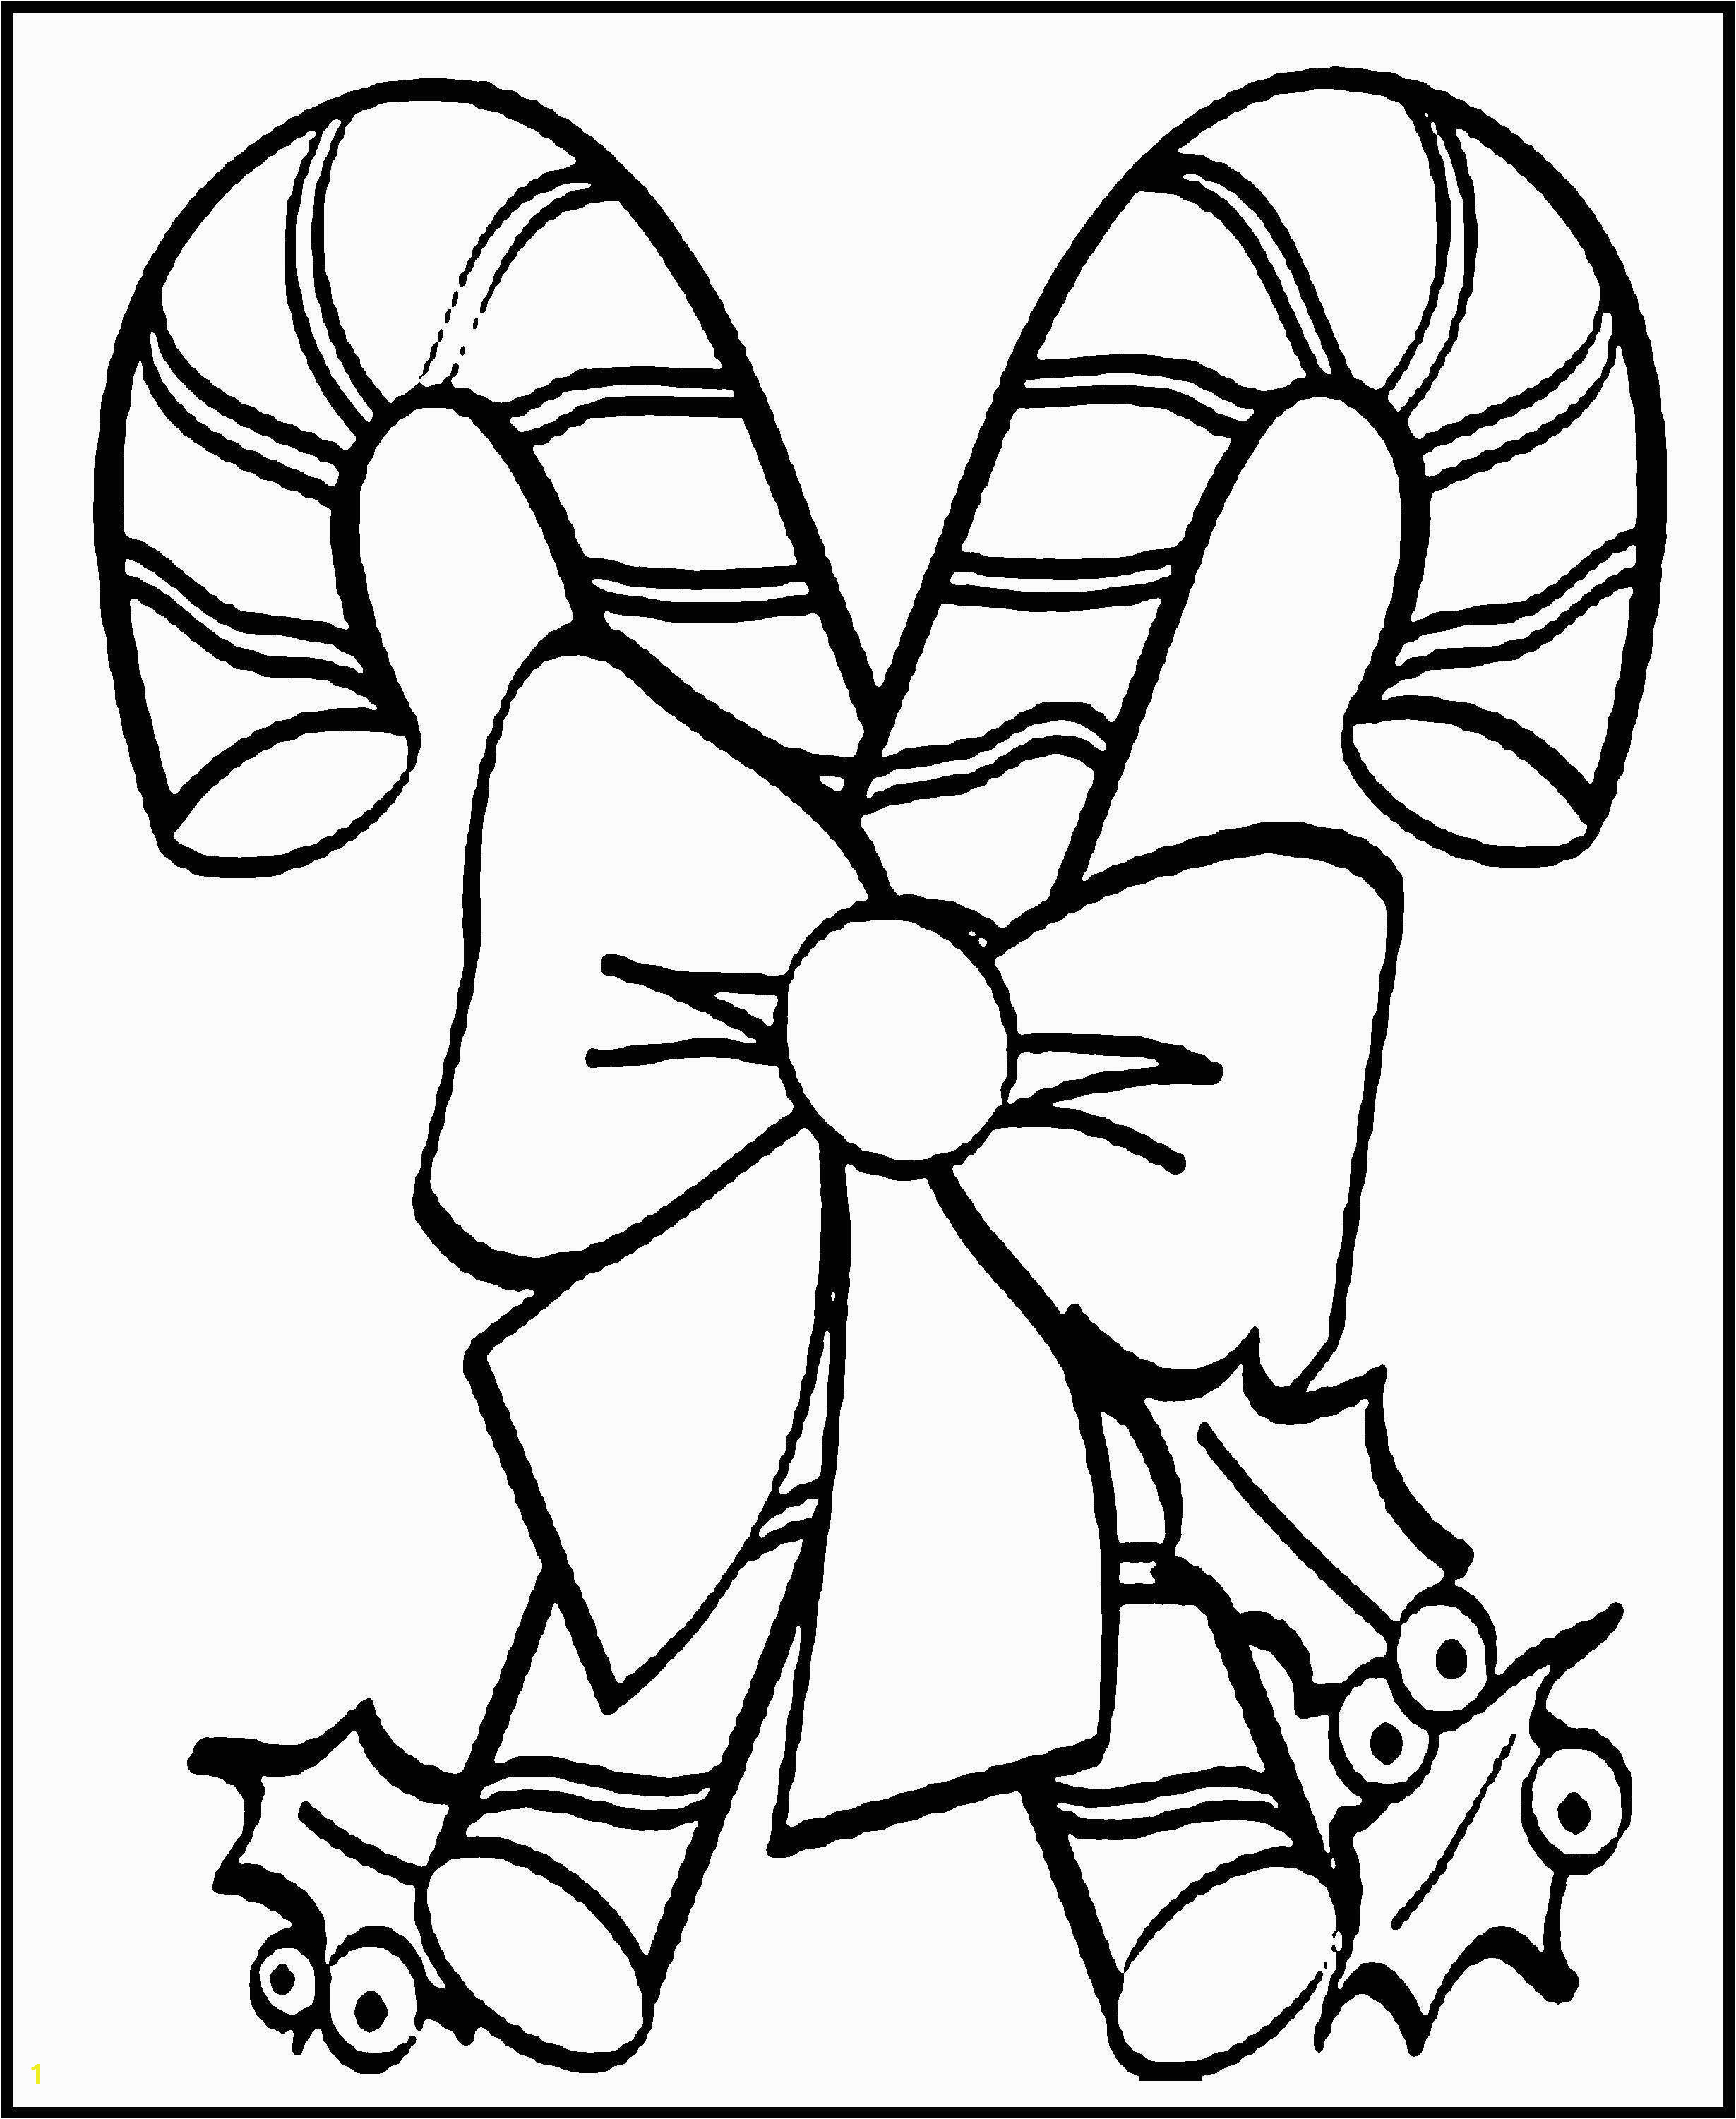 Christmas Coloring Page Frozen Disney Christmas Coloring Pages Printable Cool Coloring Pages